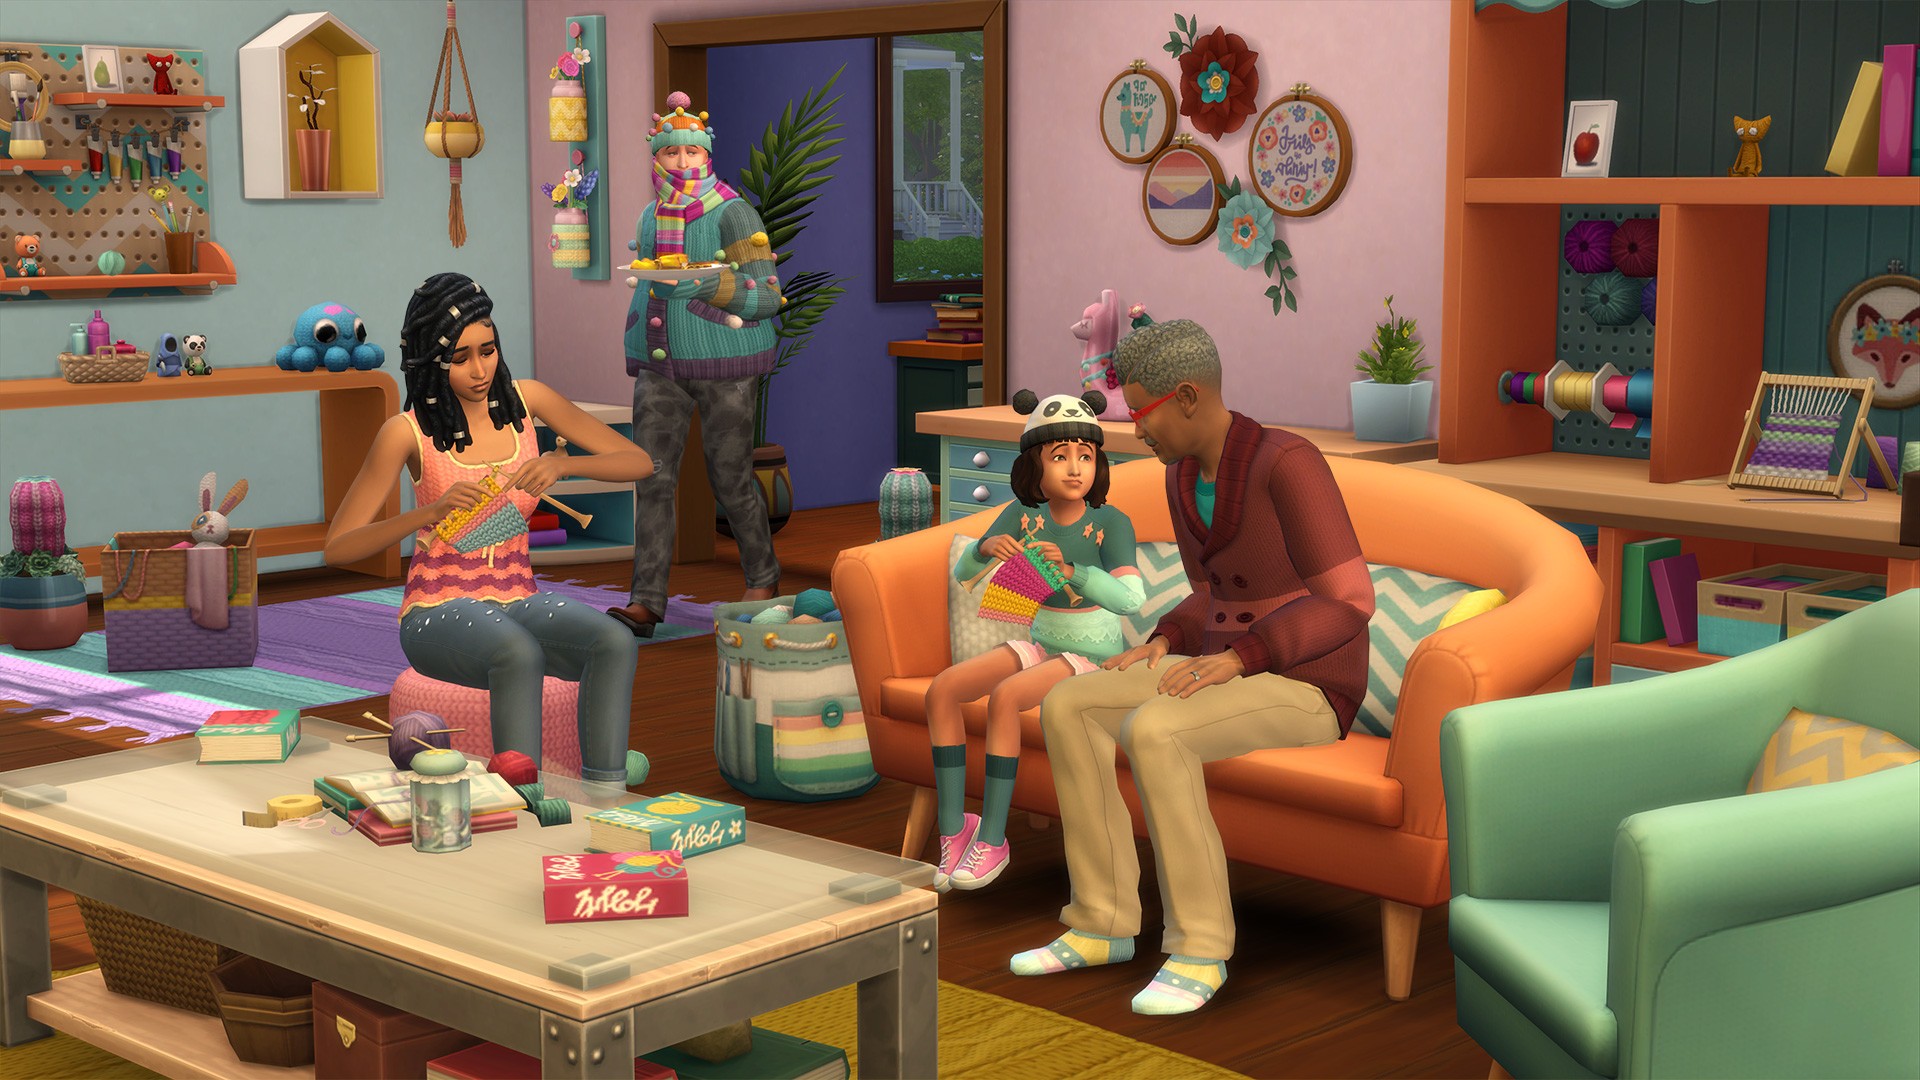 The Sims Blog: The Sims 4 Nifty Knitting Is Almost Here!